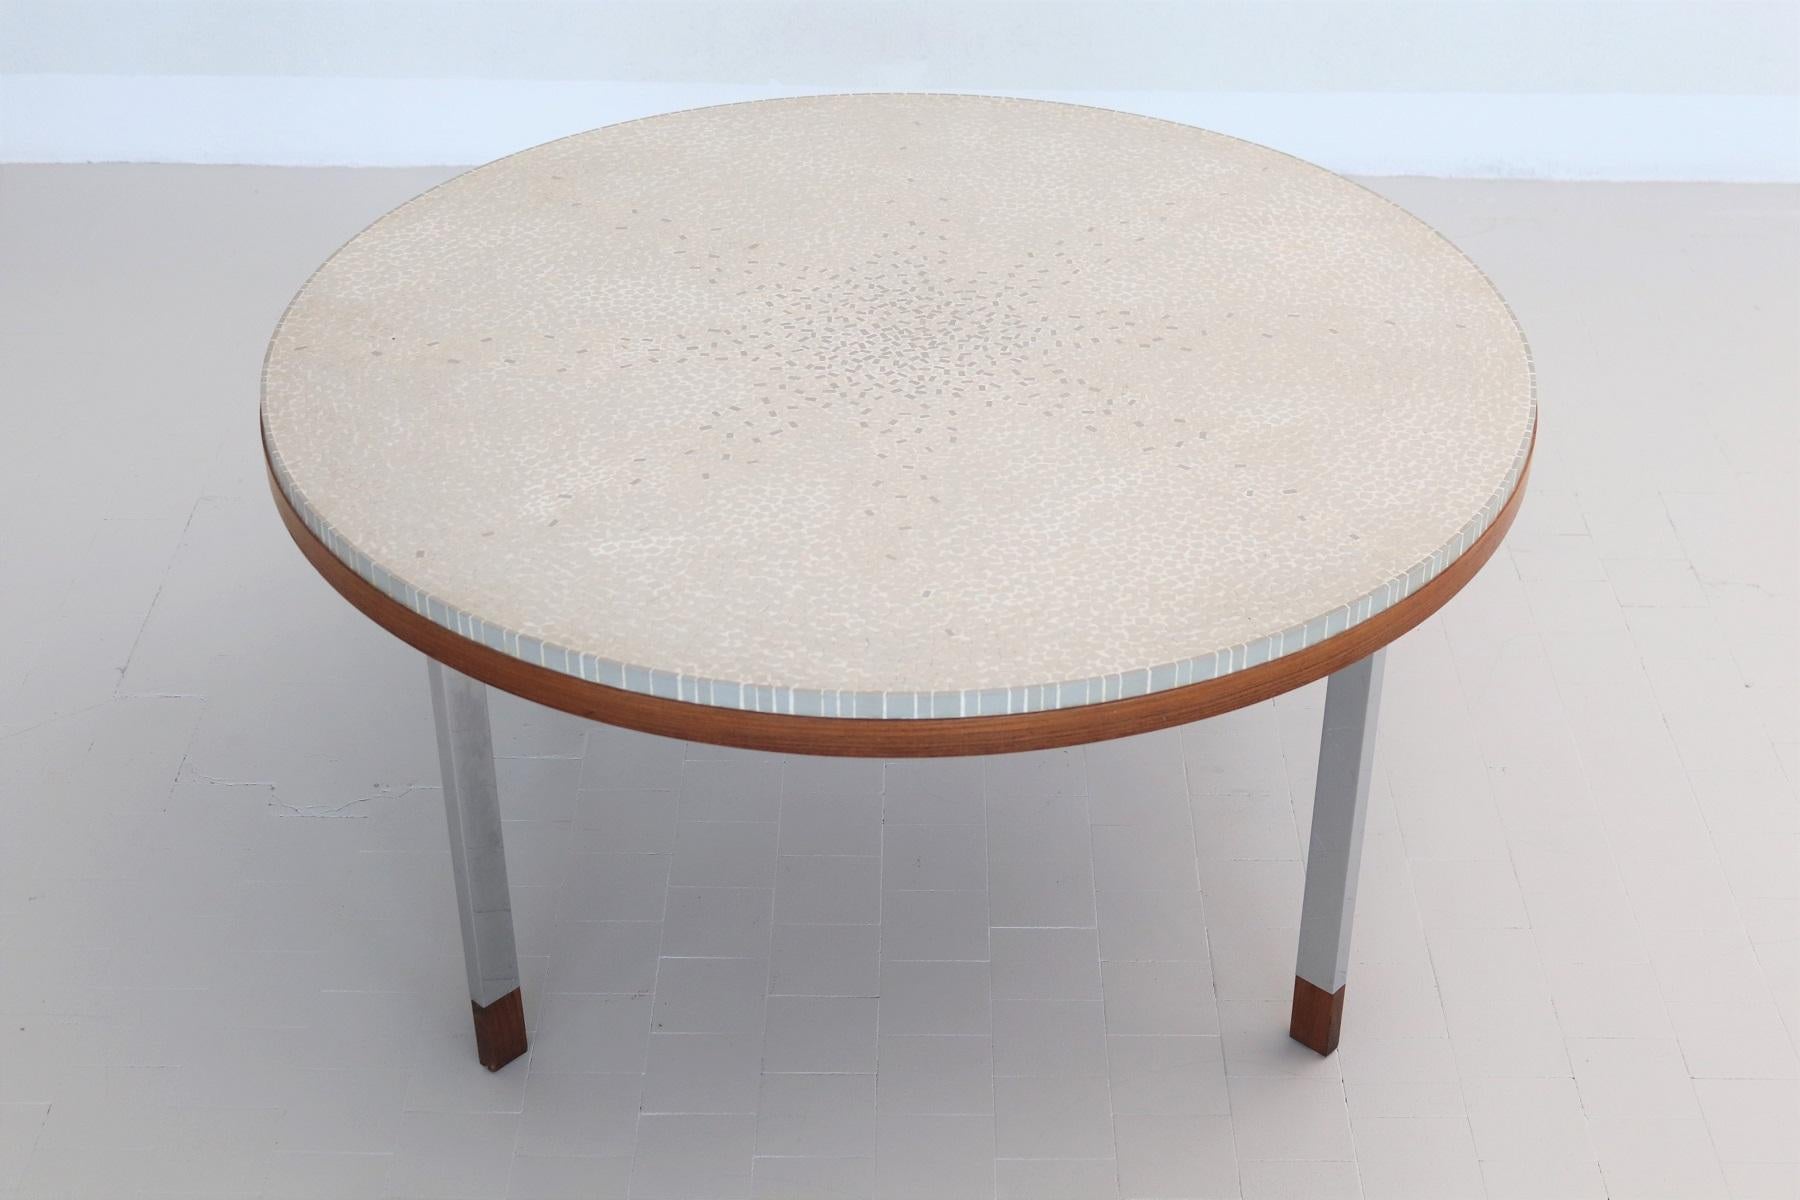 Midcentury Mosaic Tile and Teak Coffee Table by Berthold Müller, 1960s For Sale 4